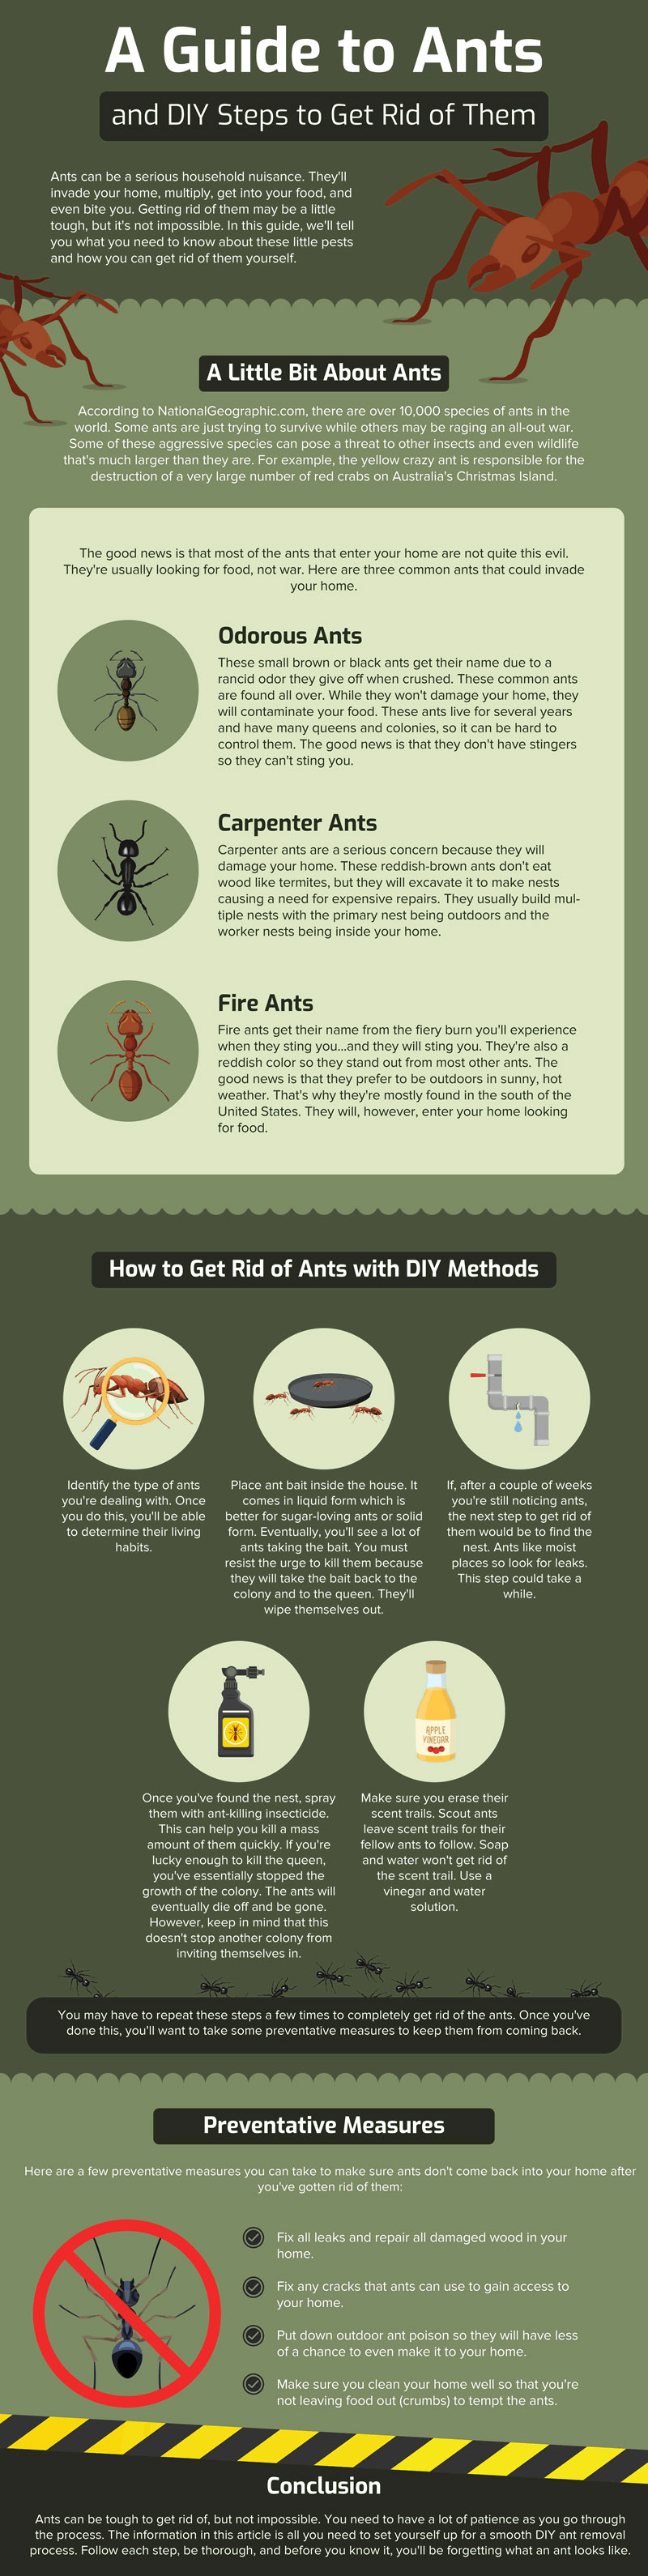 A Guide To DIY Ant Removal